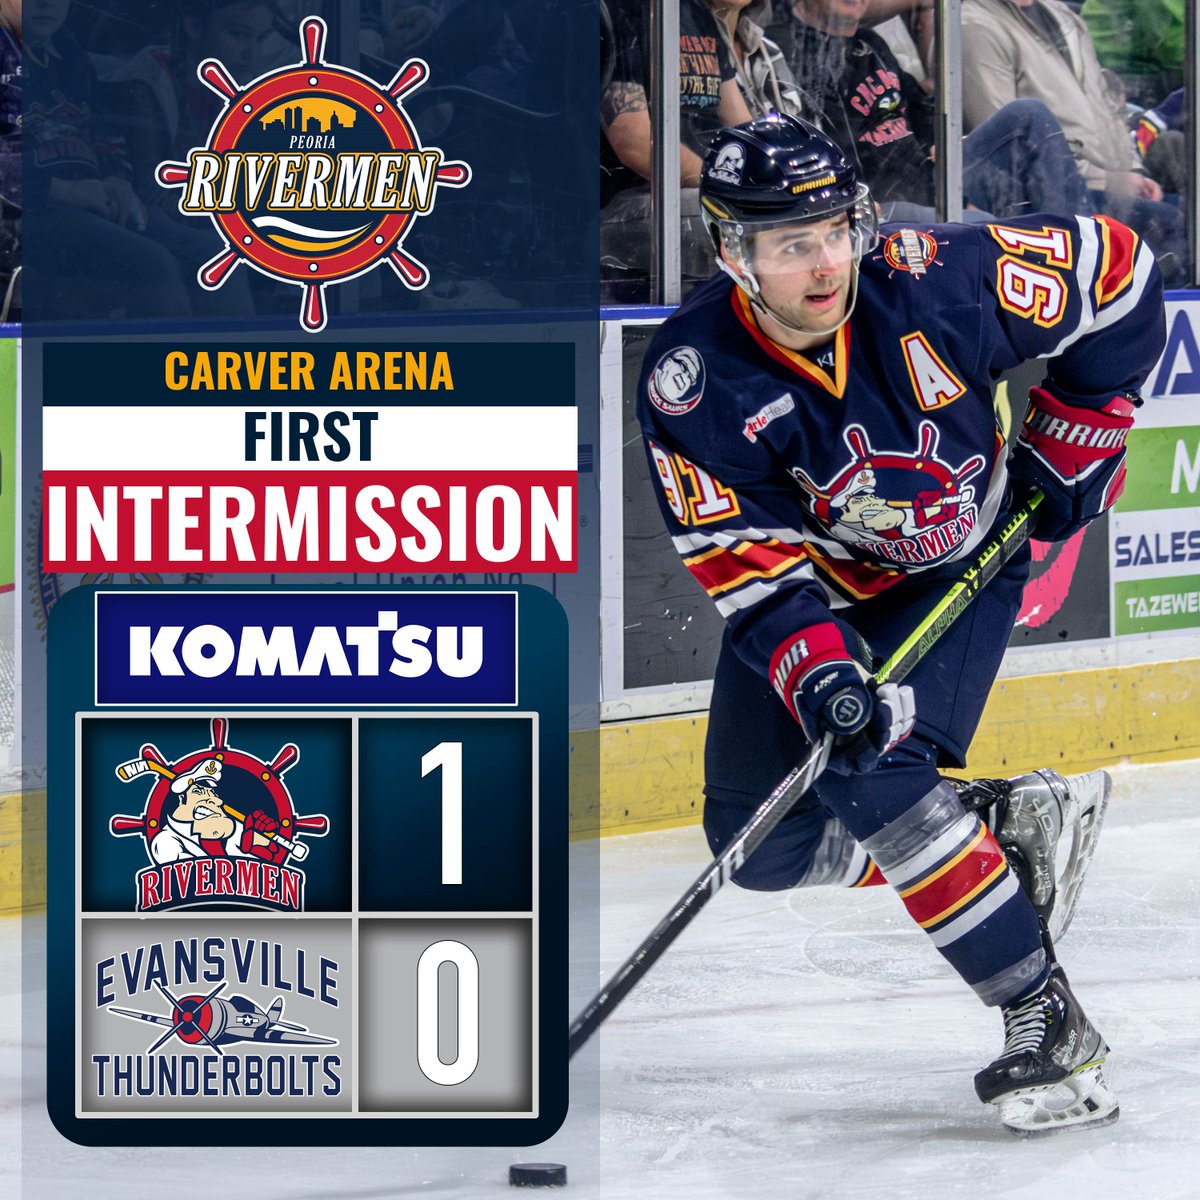 After an intense first period, the Rivermen lead it 1-0
SOG: 18-5 PEO
#HoistTheColors